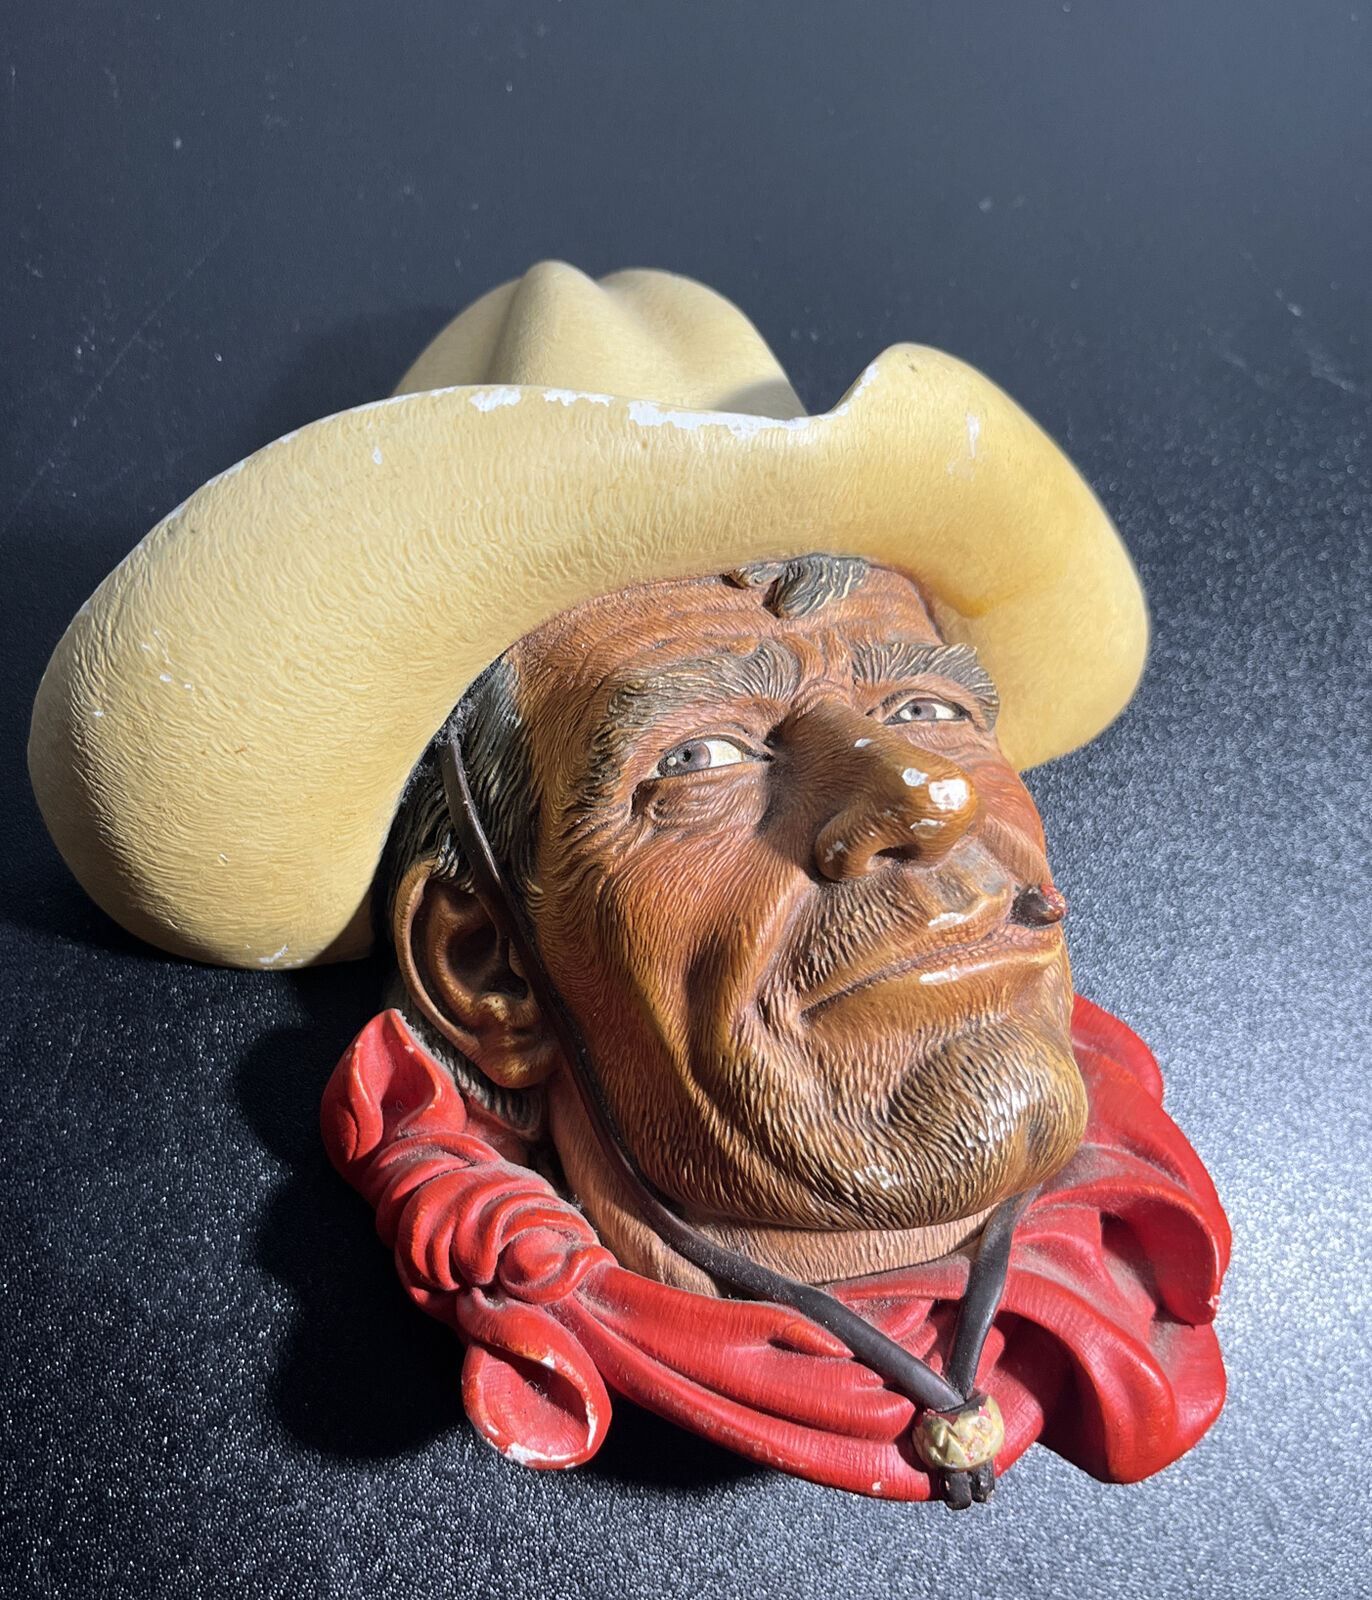 Bossons England Chalkware Head Rawhide Hanger Cowboy Aproximately 6 inches 1967